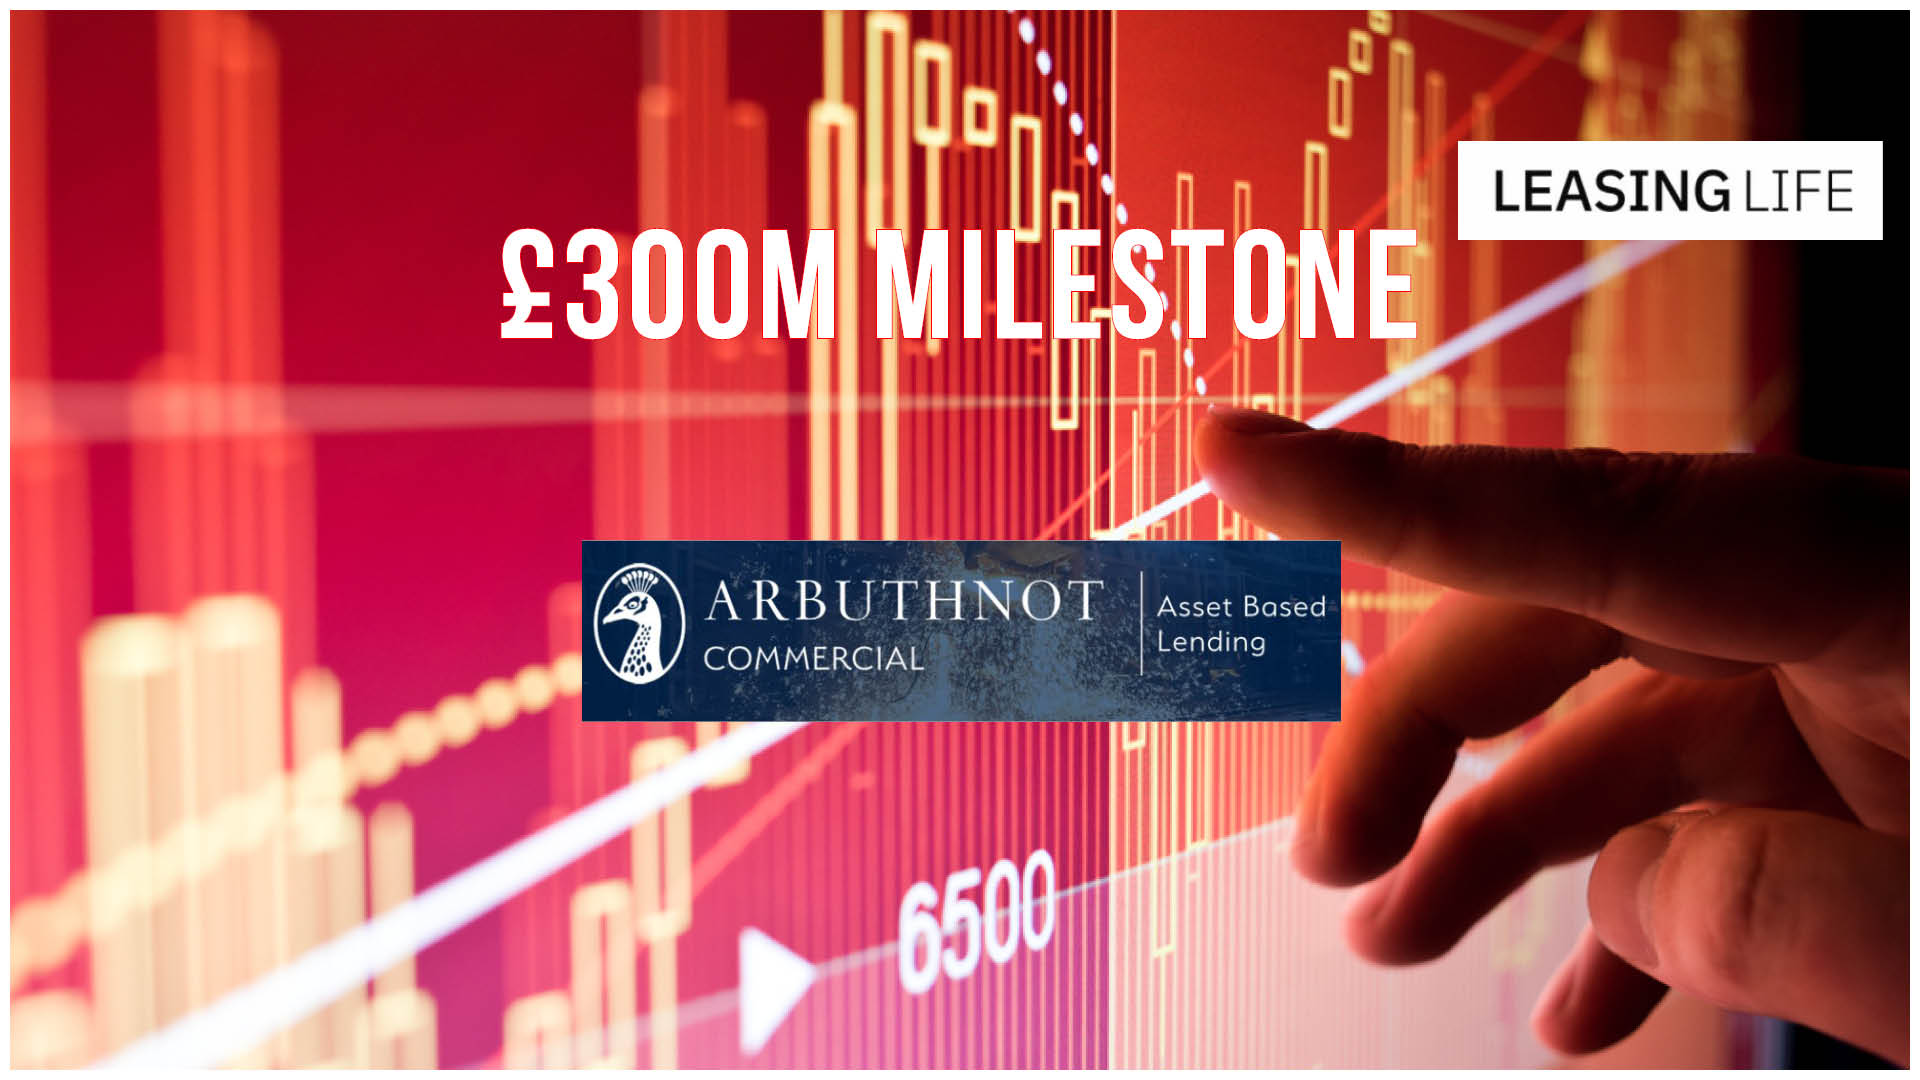 Arbuthnot Commercial ABL hits £300m milestone